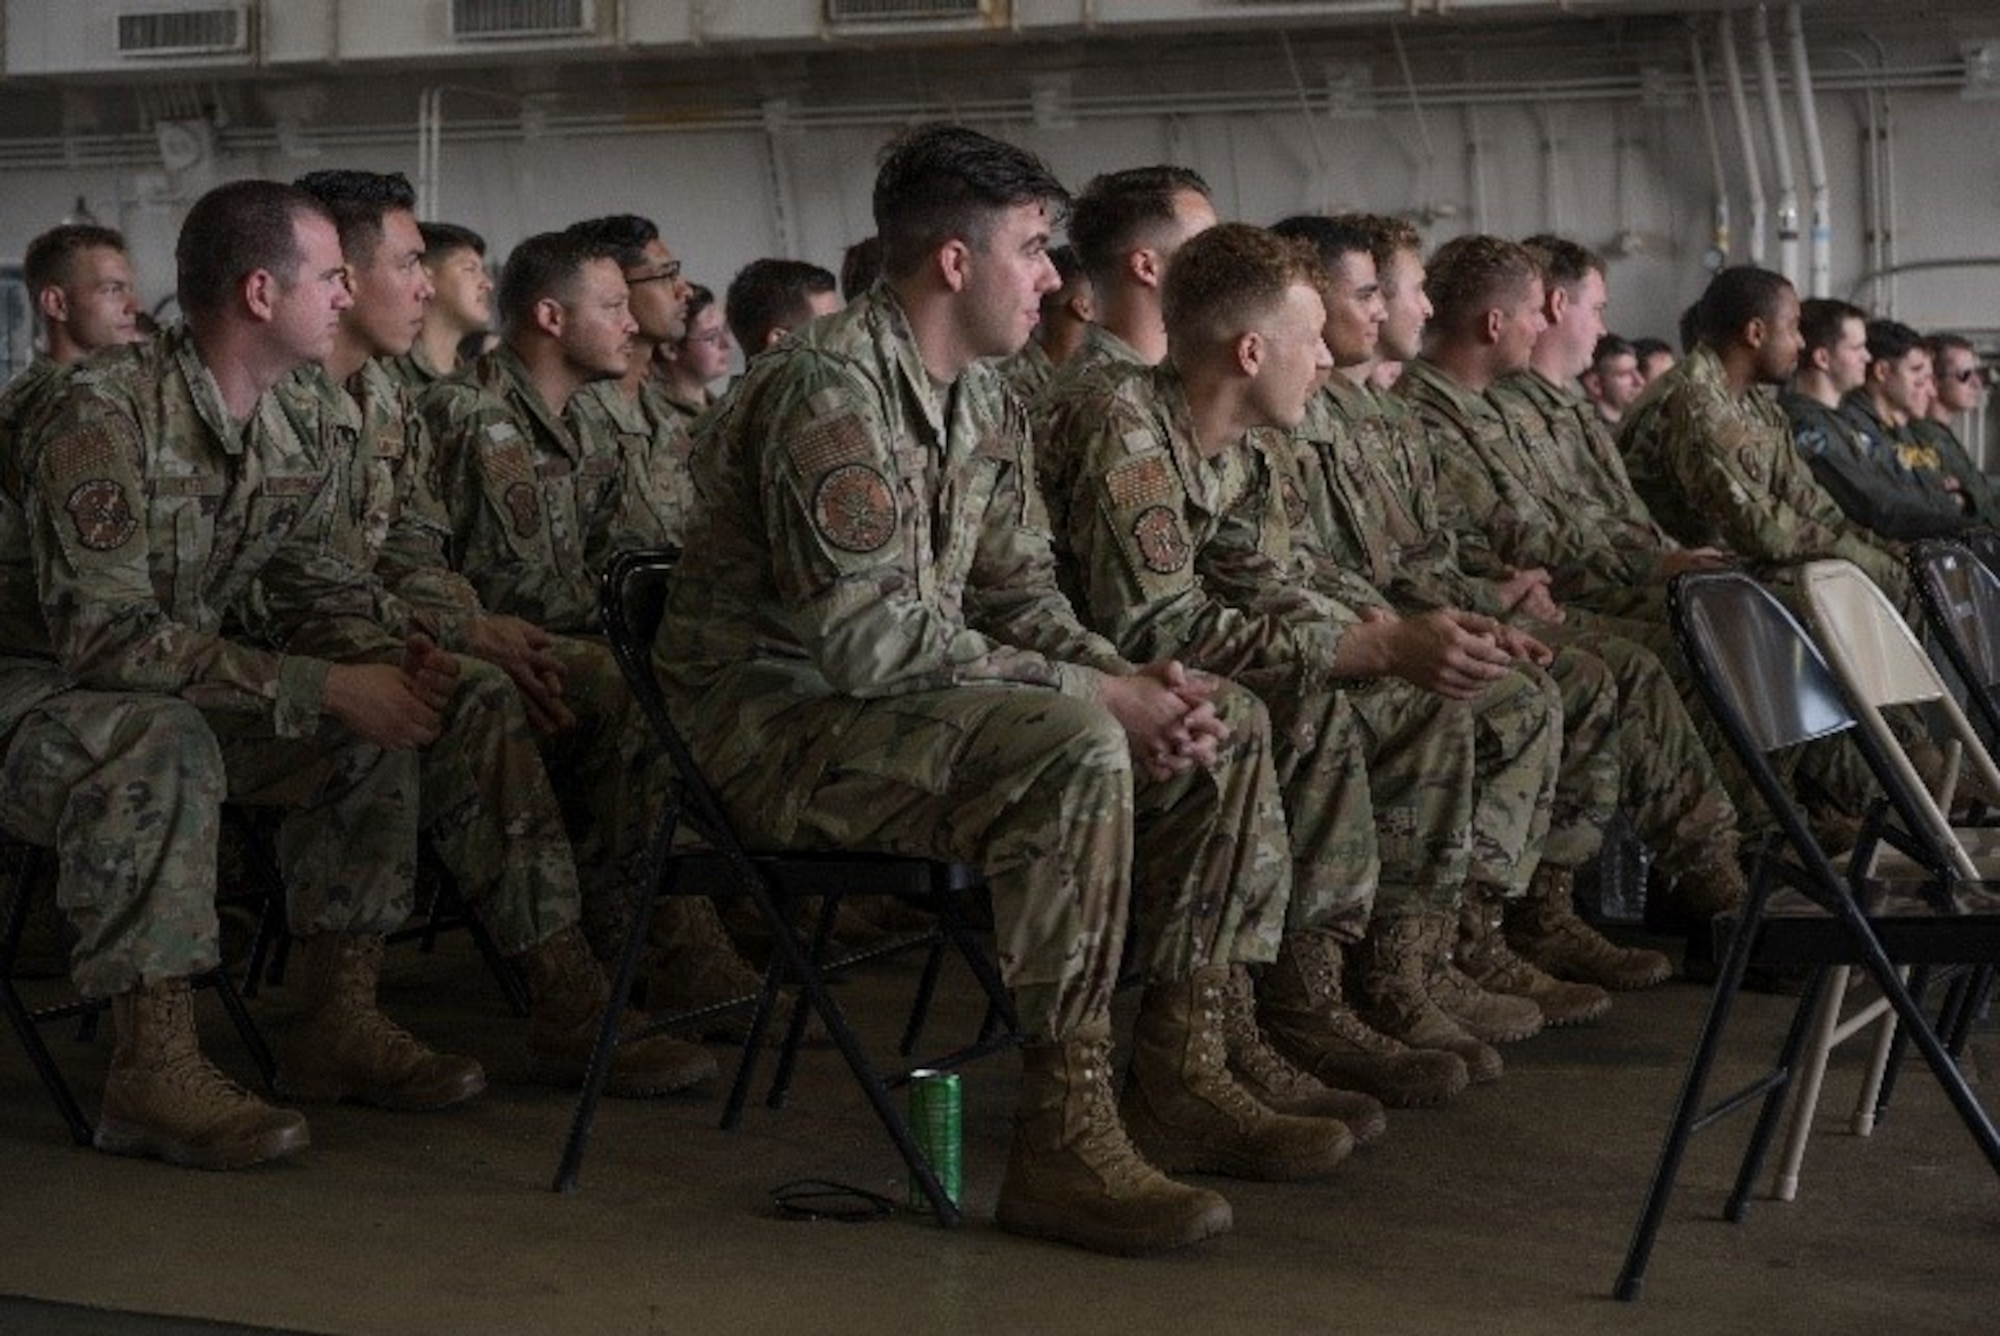 Military members sitting in a row of chairs at a ceremony in a hanger.